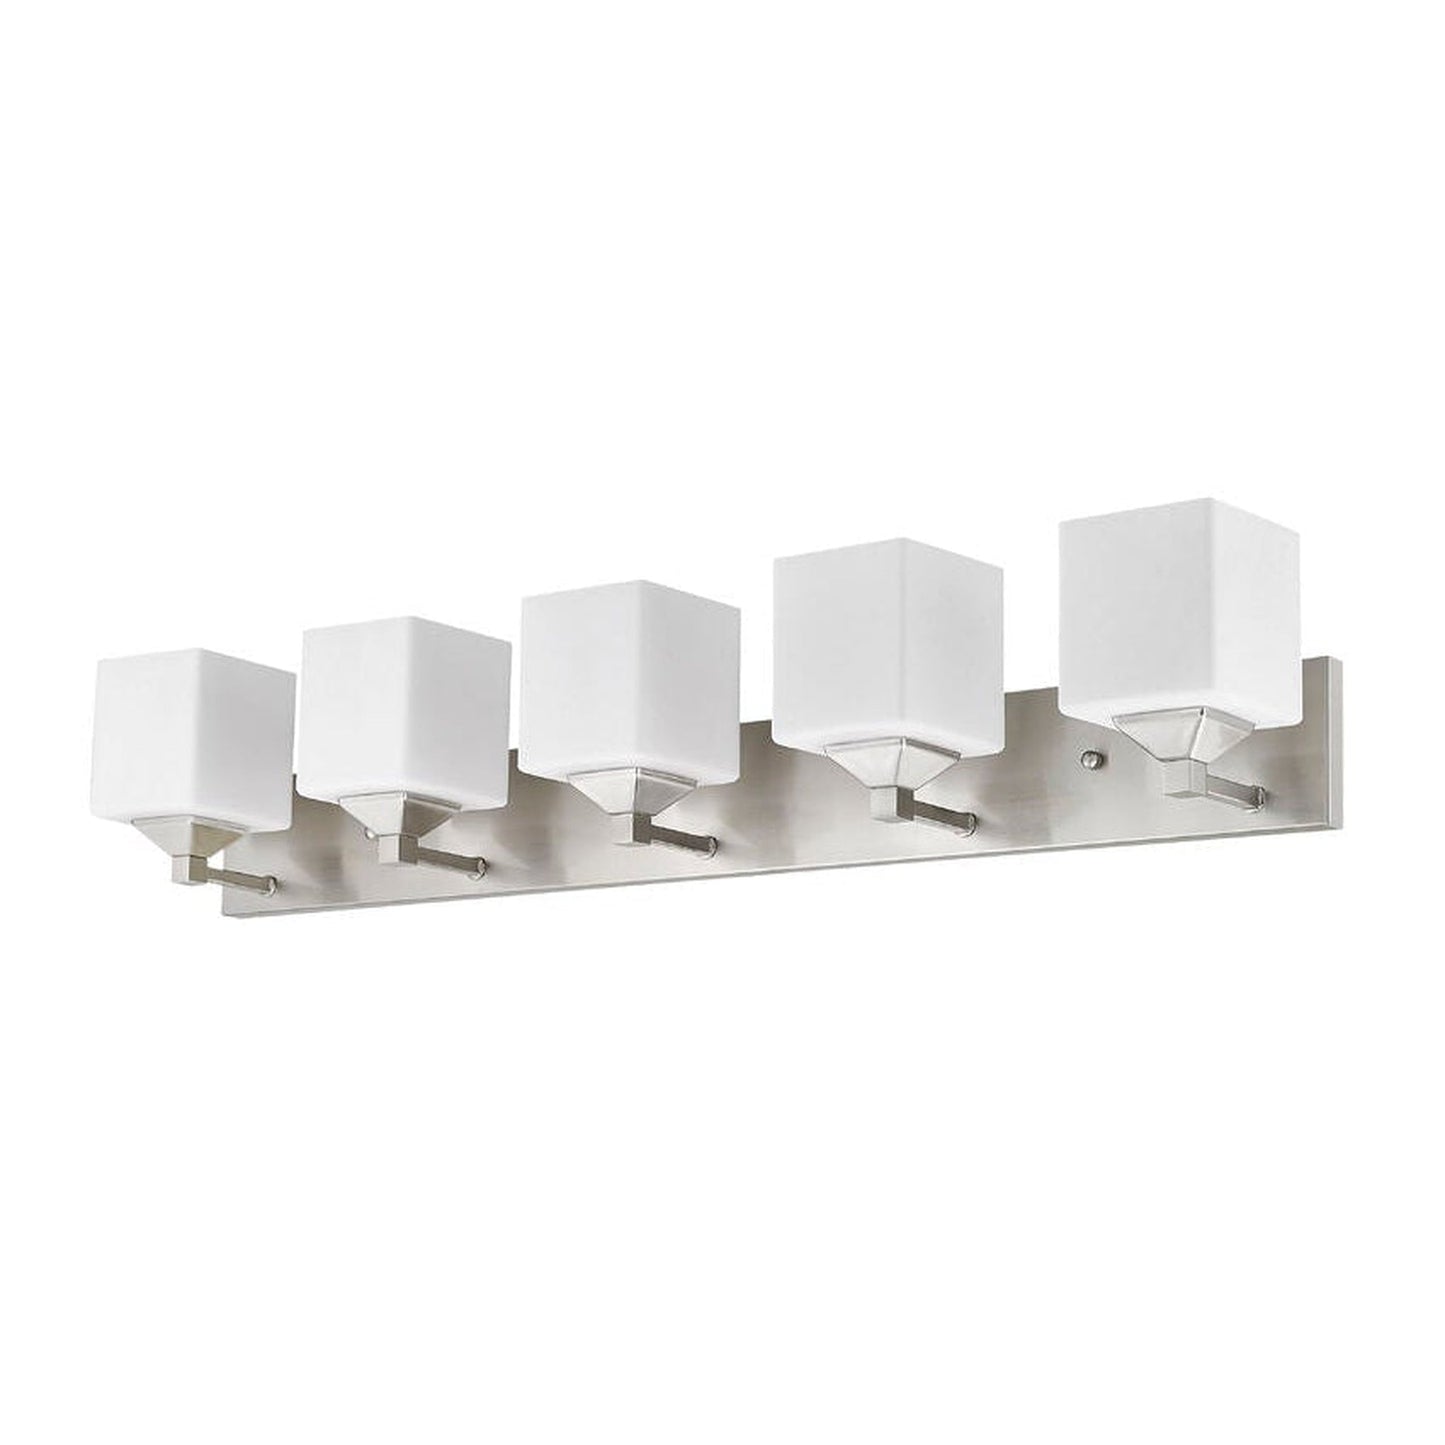 Z-Lite Quube 39" 5-Light Brushed Nickel Vanity Light With Matte Opal Glass Shade